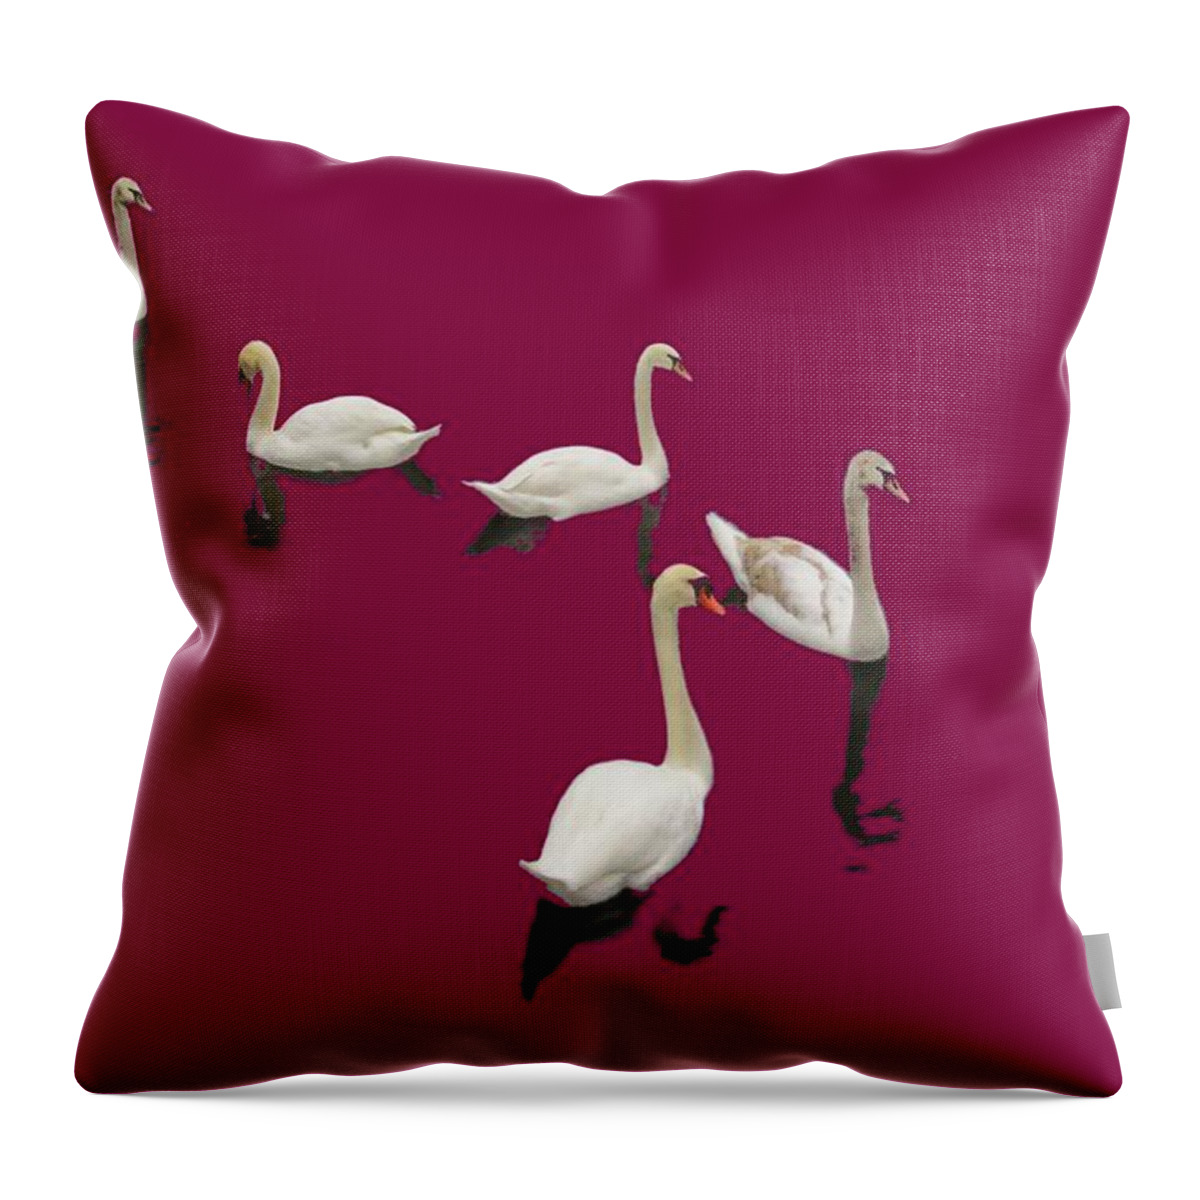 Background Burgandy Throw Pillow featuring the photograph Swan Family On Burgandy by Constantine Gregory